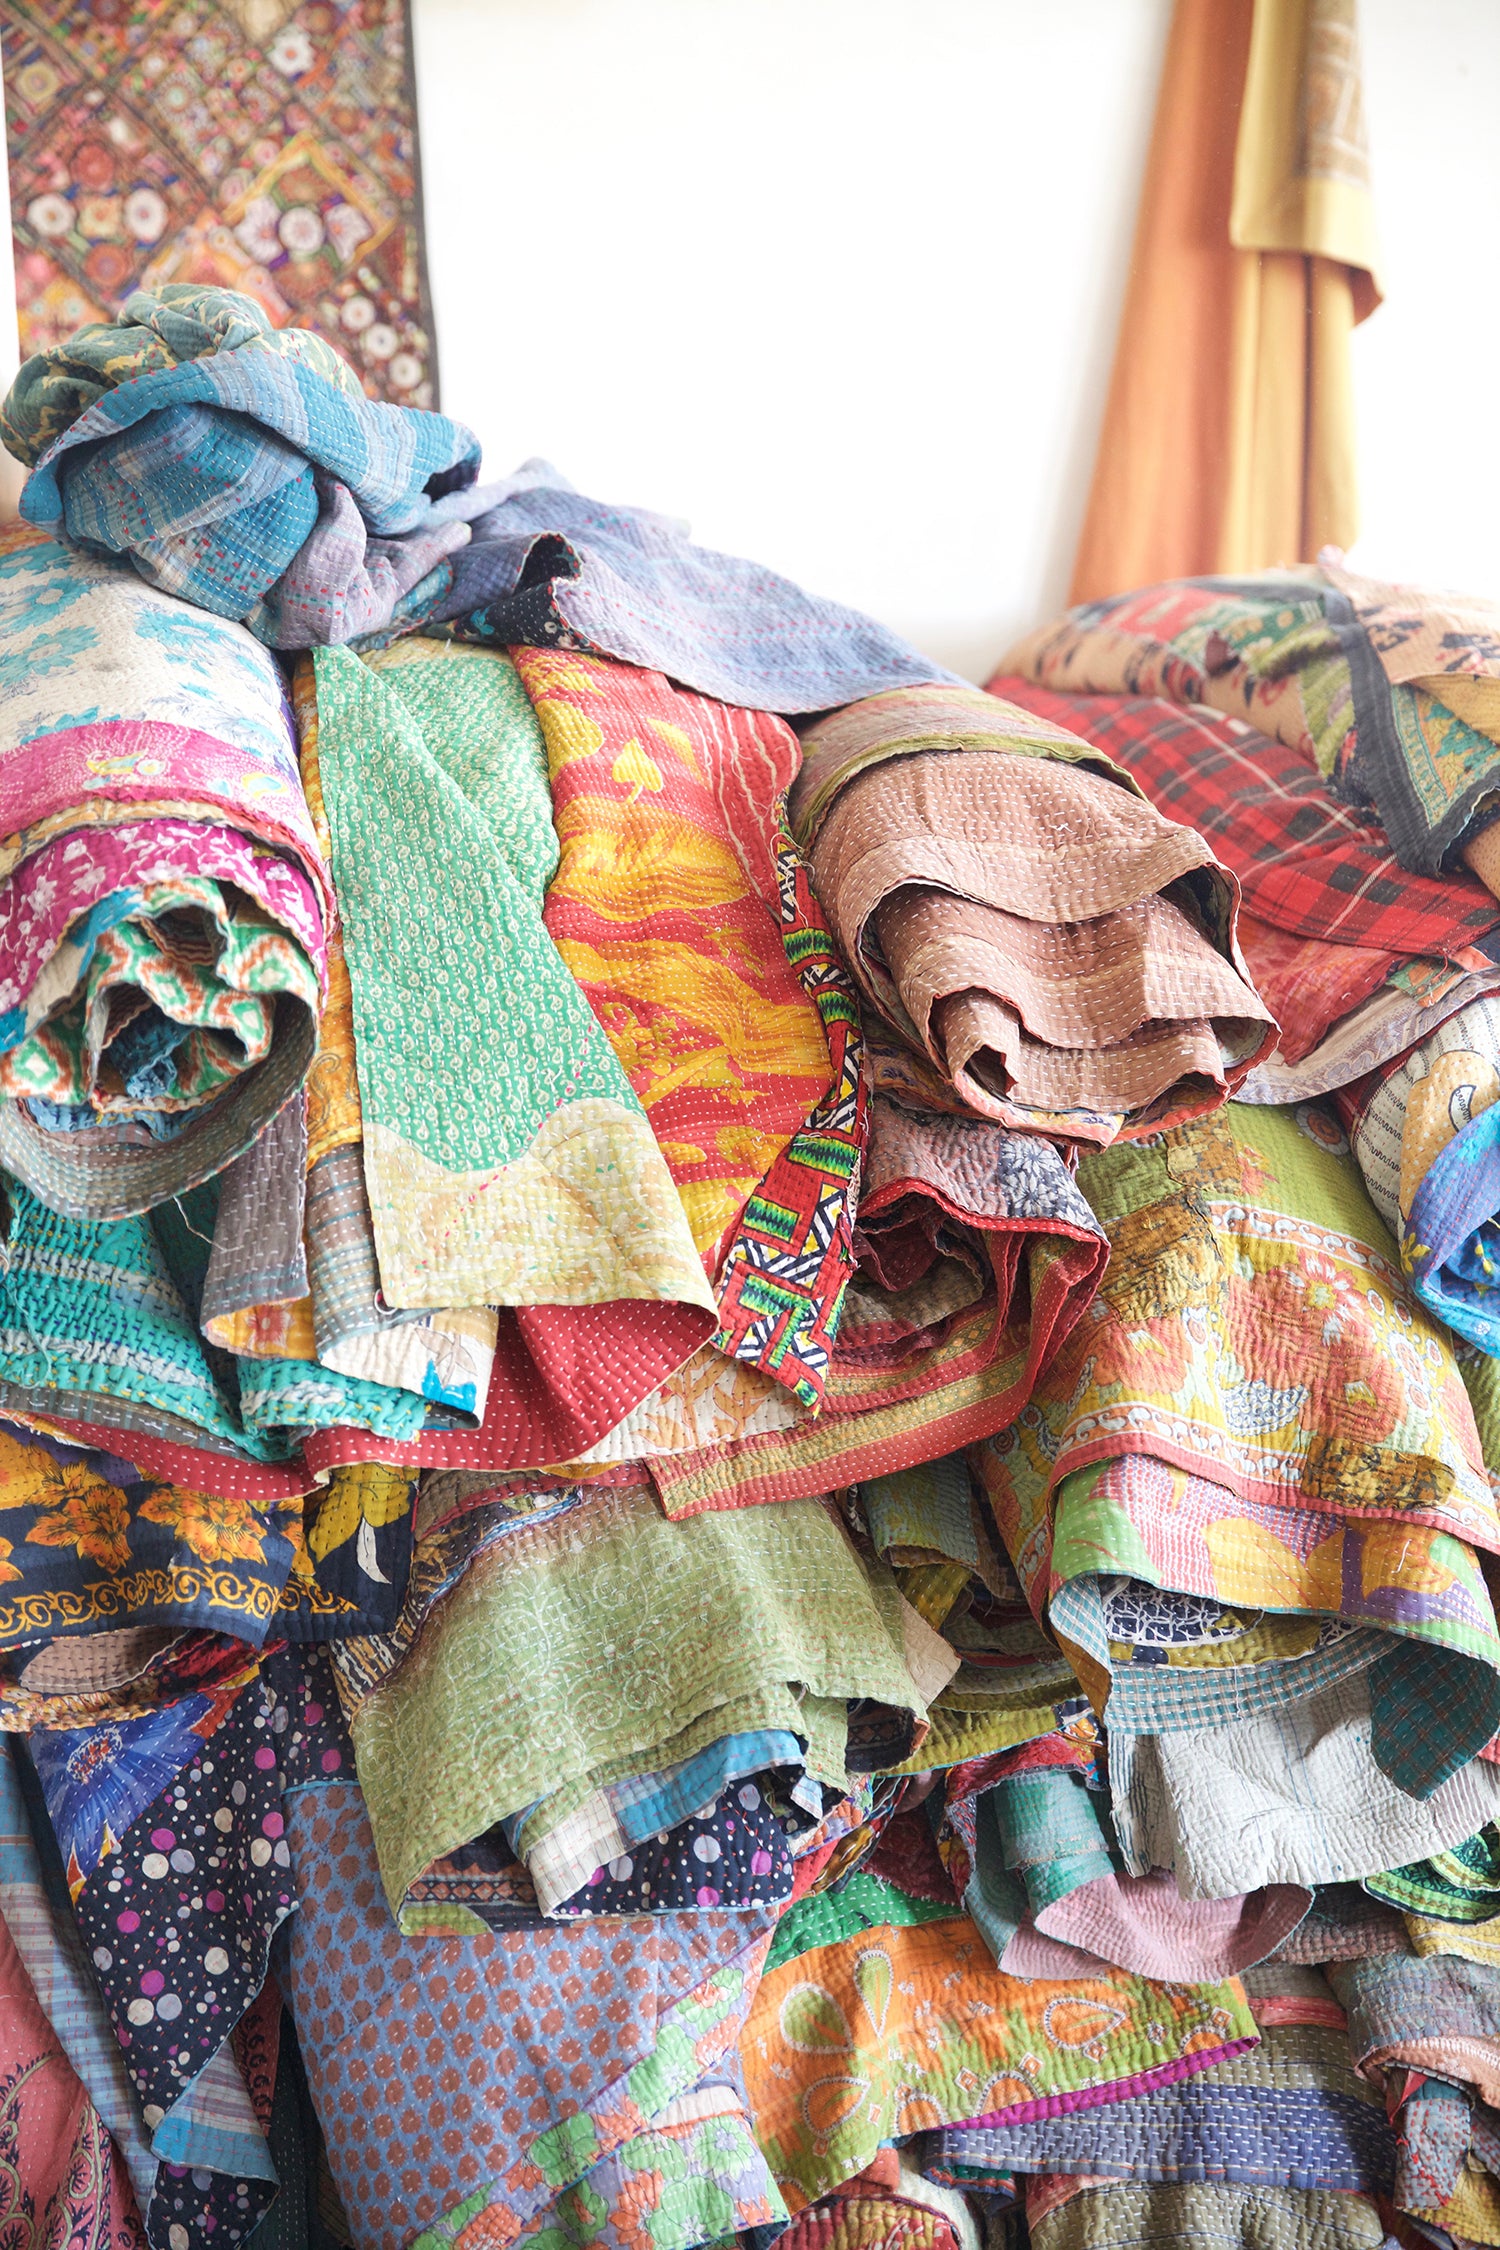 Made in India: A Curation by Christine Chitnis | Covet + Lou | Covet + Lou